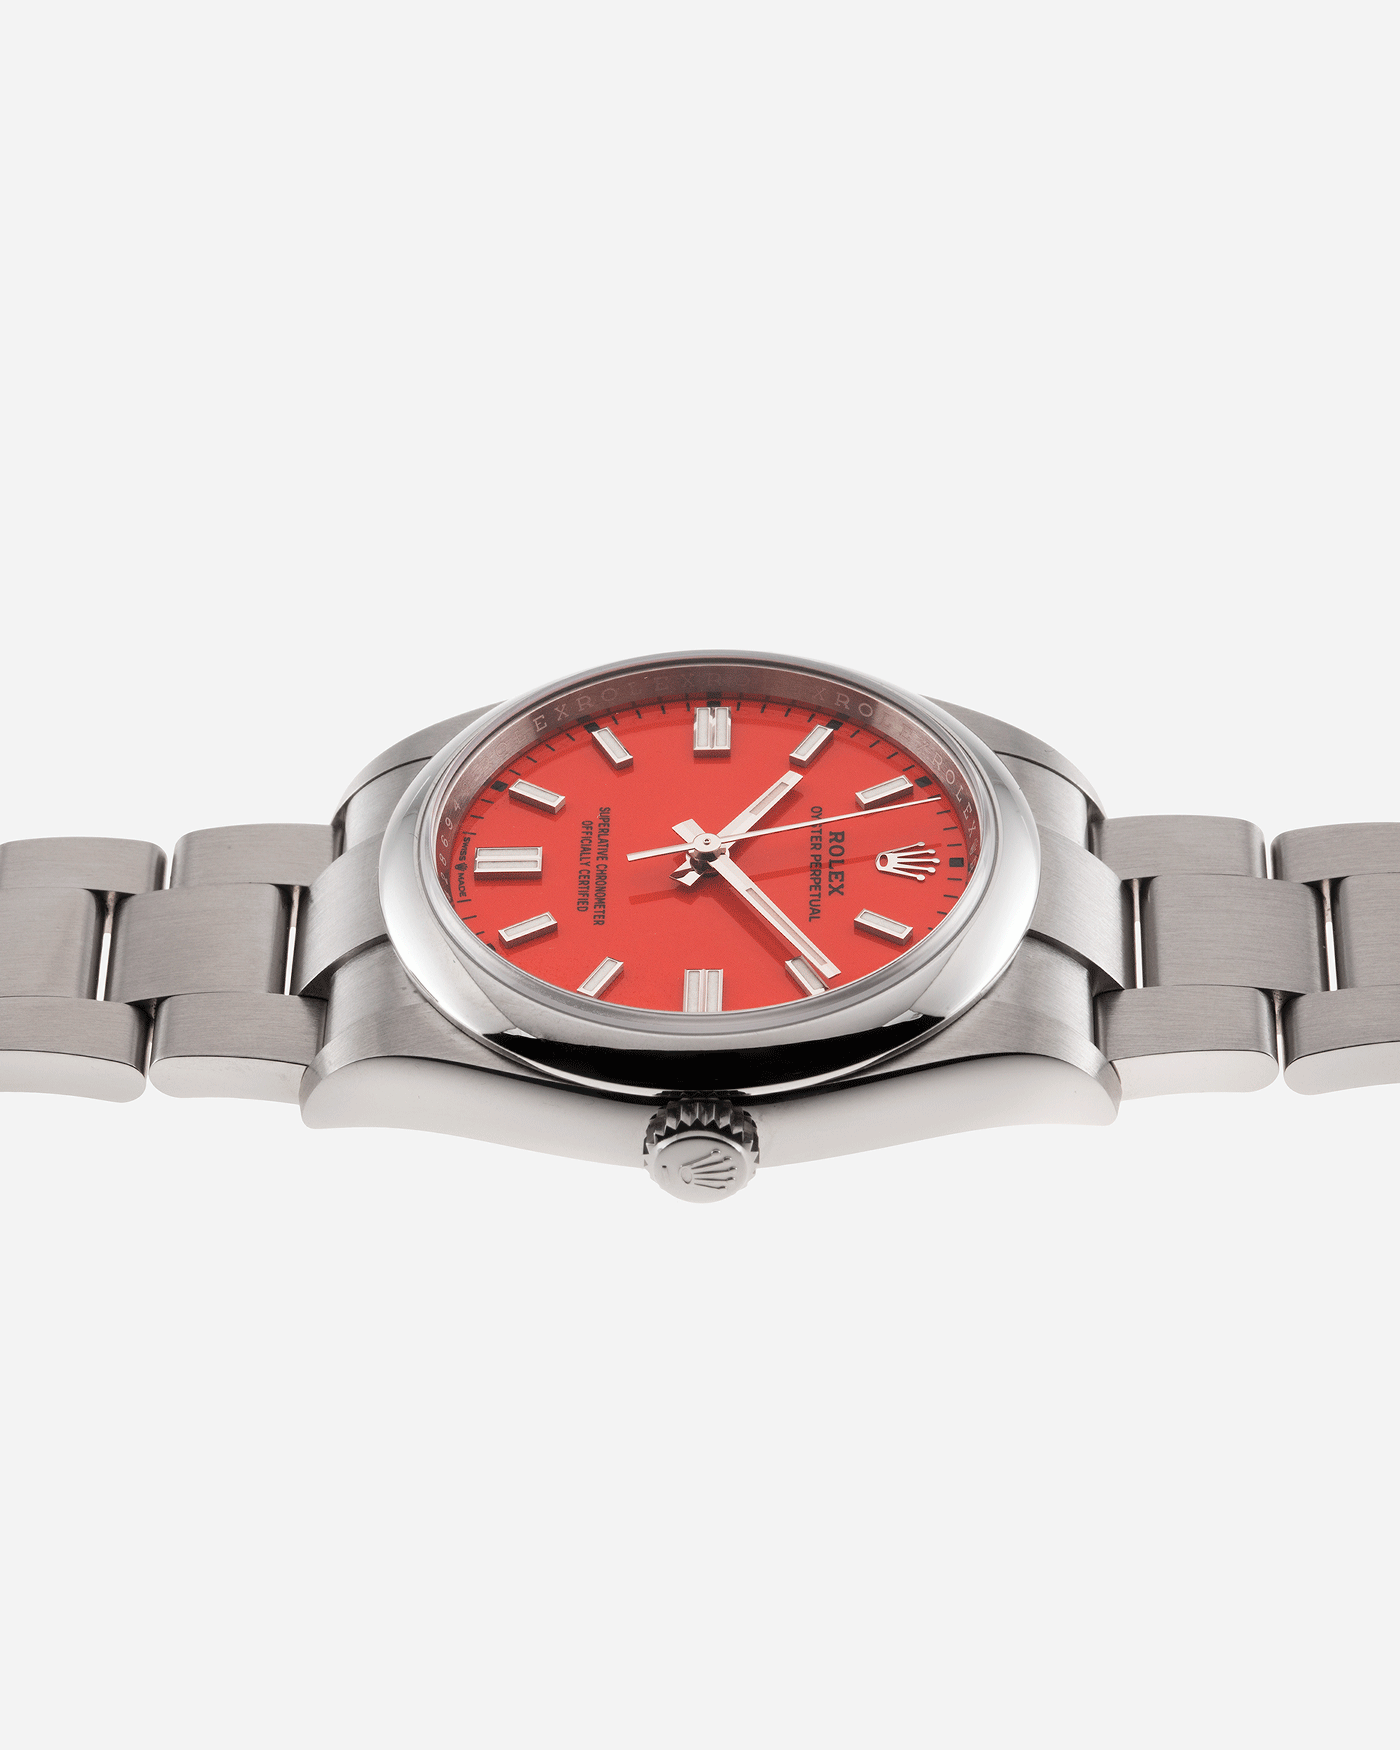 Brand: Rolex Year: 2021 Model: Oyster Perpetual 36 Reference Number: 126000 Material: 904L Stainless Steel Movement: Cal. 3230 Case Diameter: 36mm Bracelet: Stainless Steel Rolex Oyster Bracelet